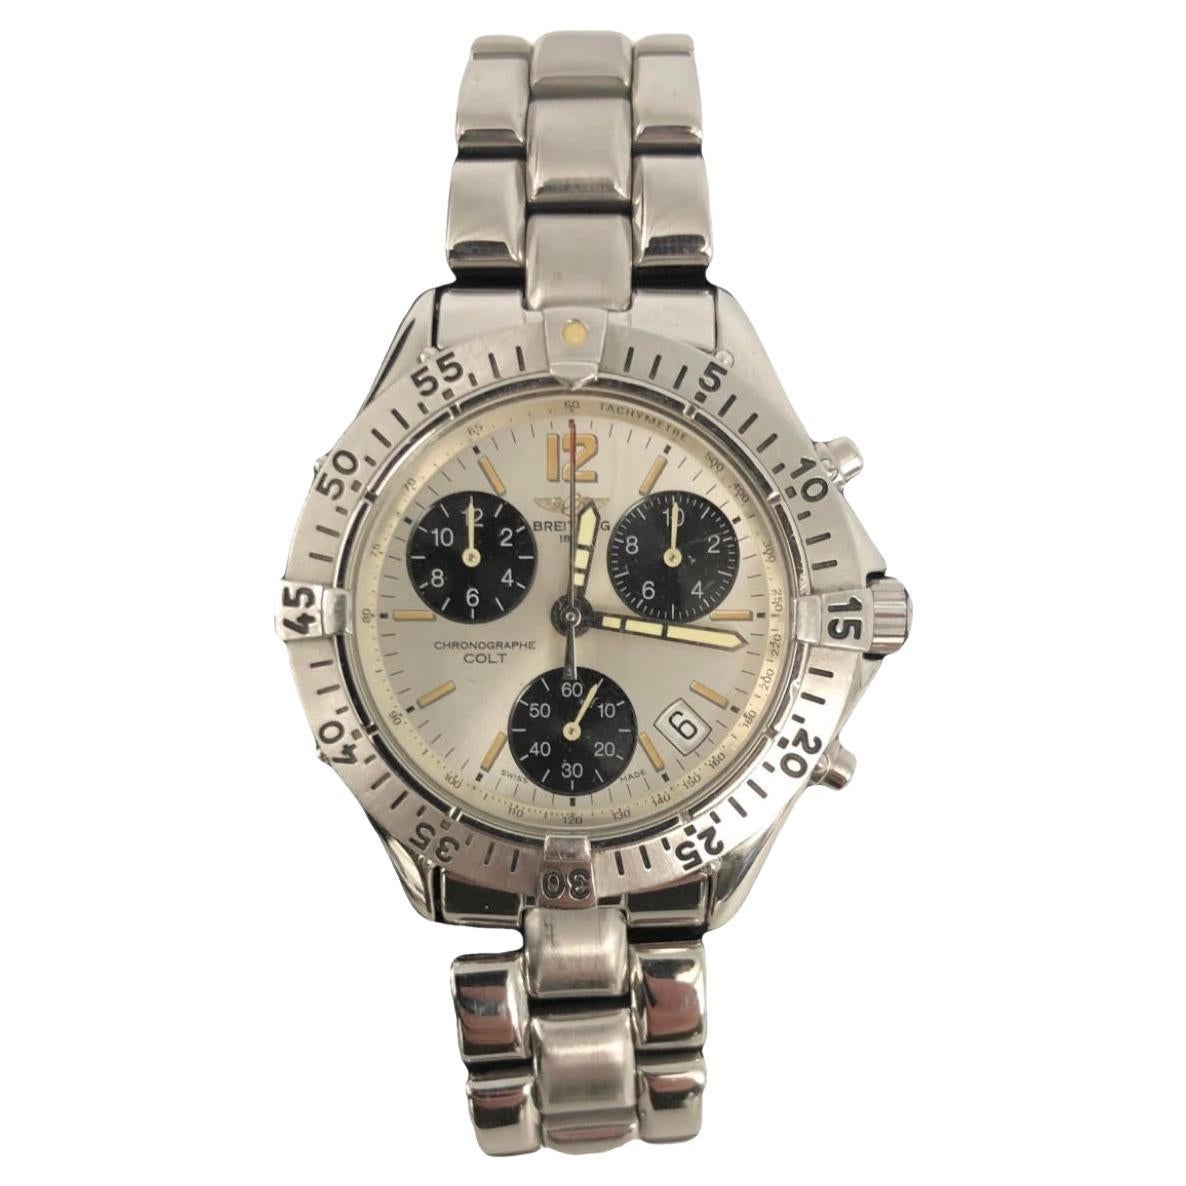 Men’s Breitling Colt Chronograph A53035 Stainless Steel Watch mm For Sale